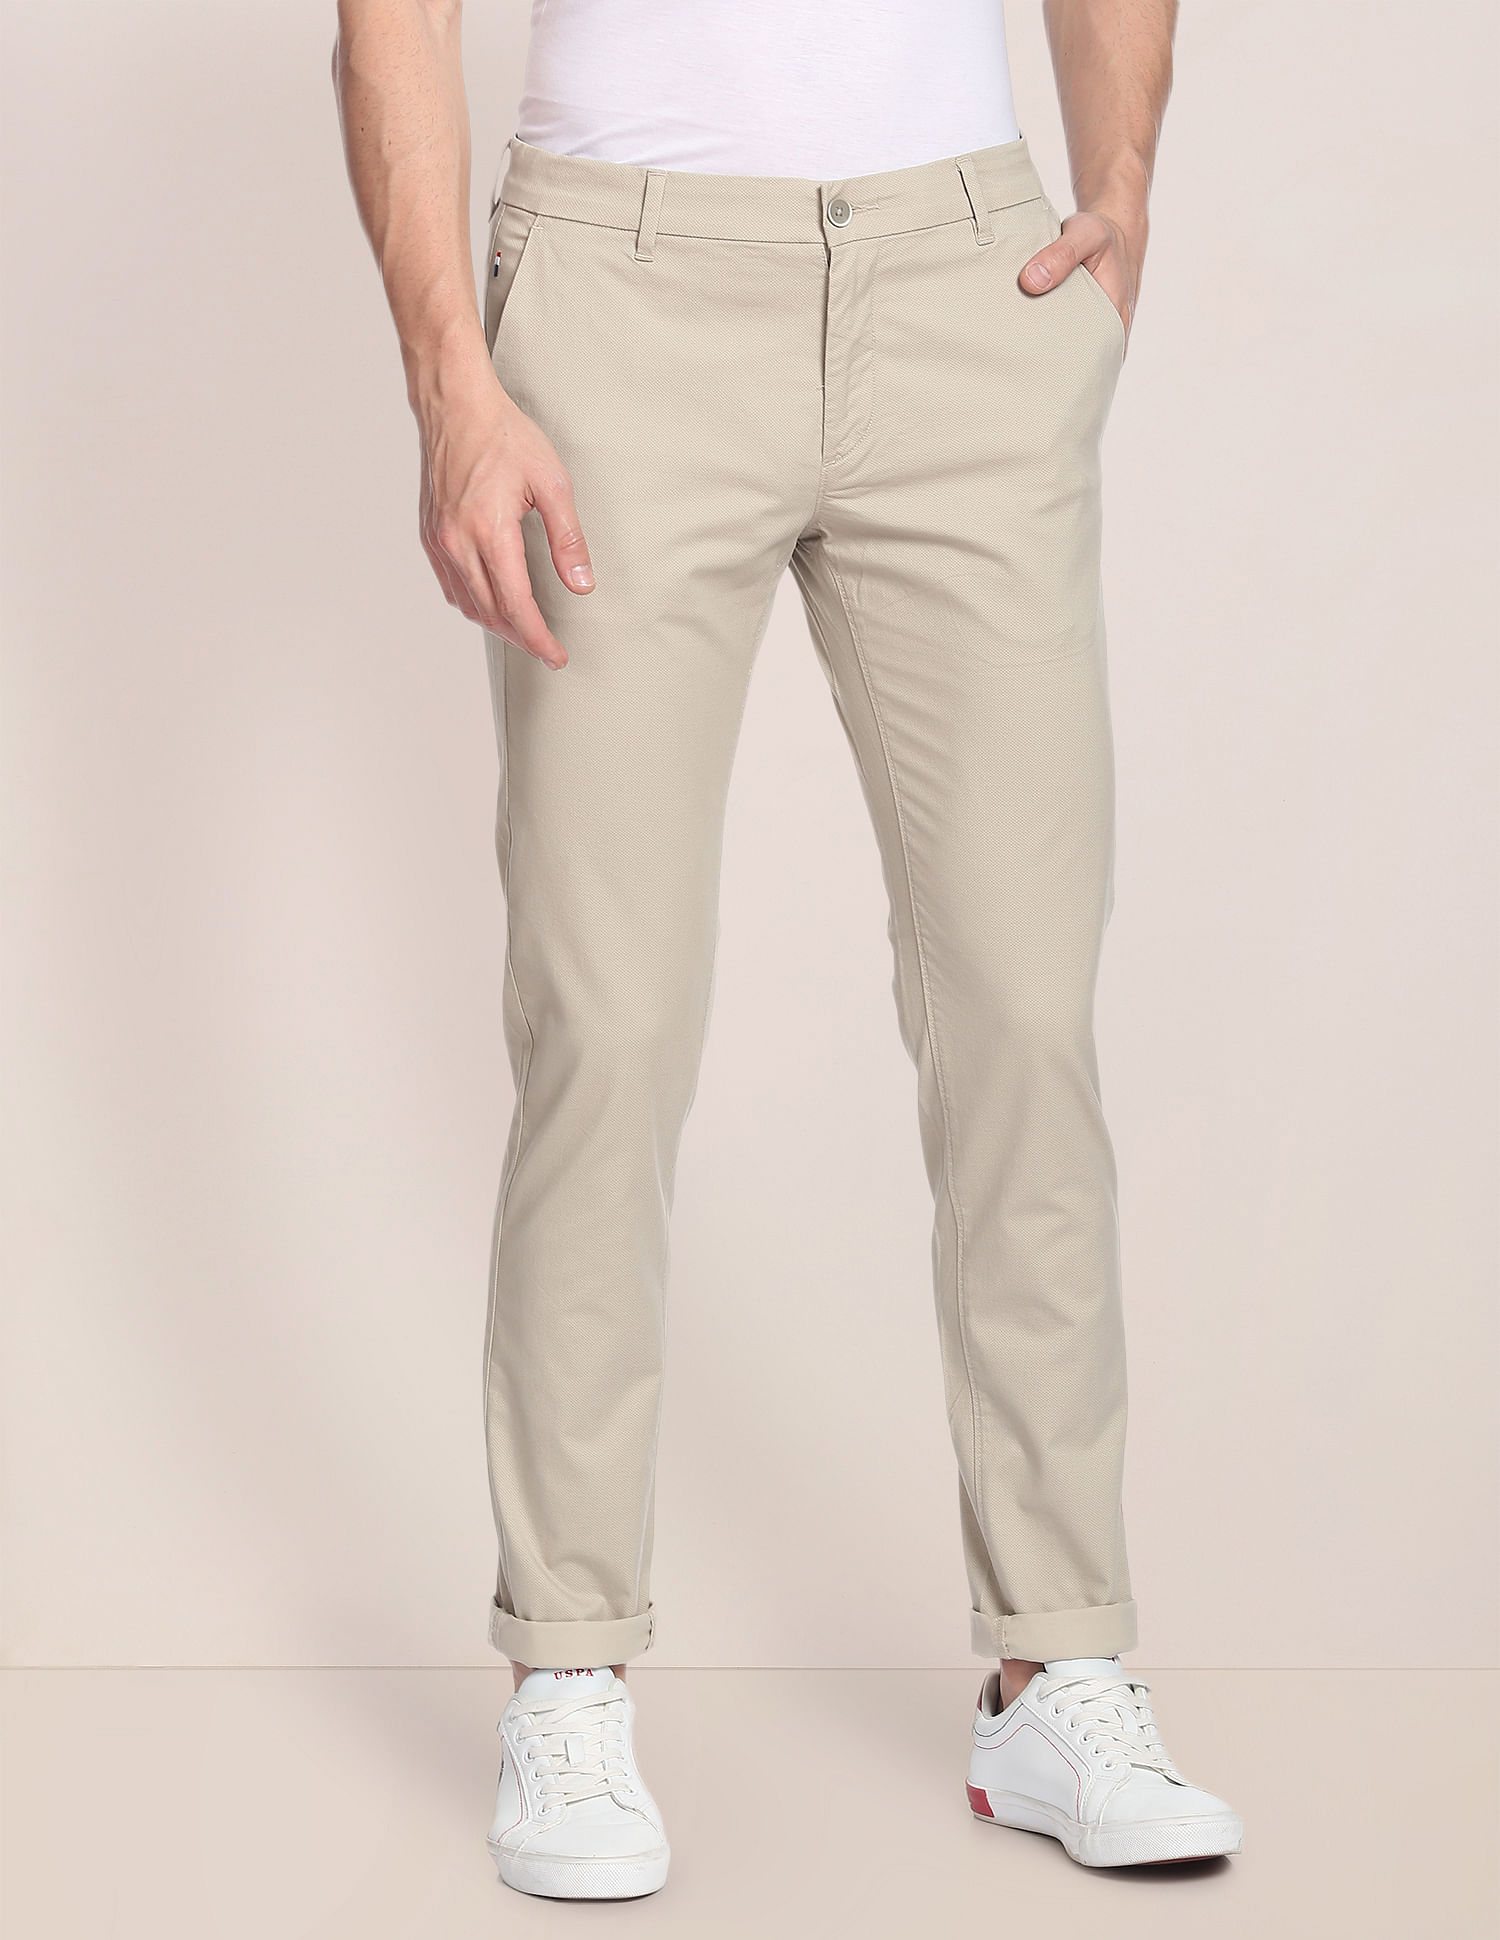 Buy U.S. Polo Assn. Twill Dyed Trousers - NNNOW.com